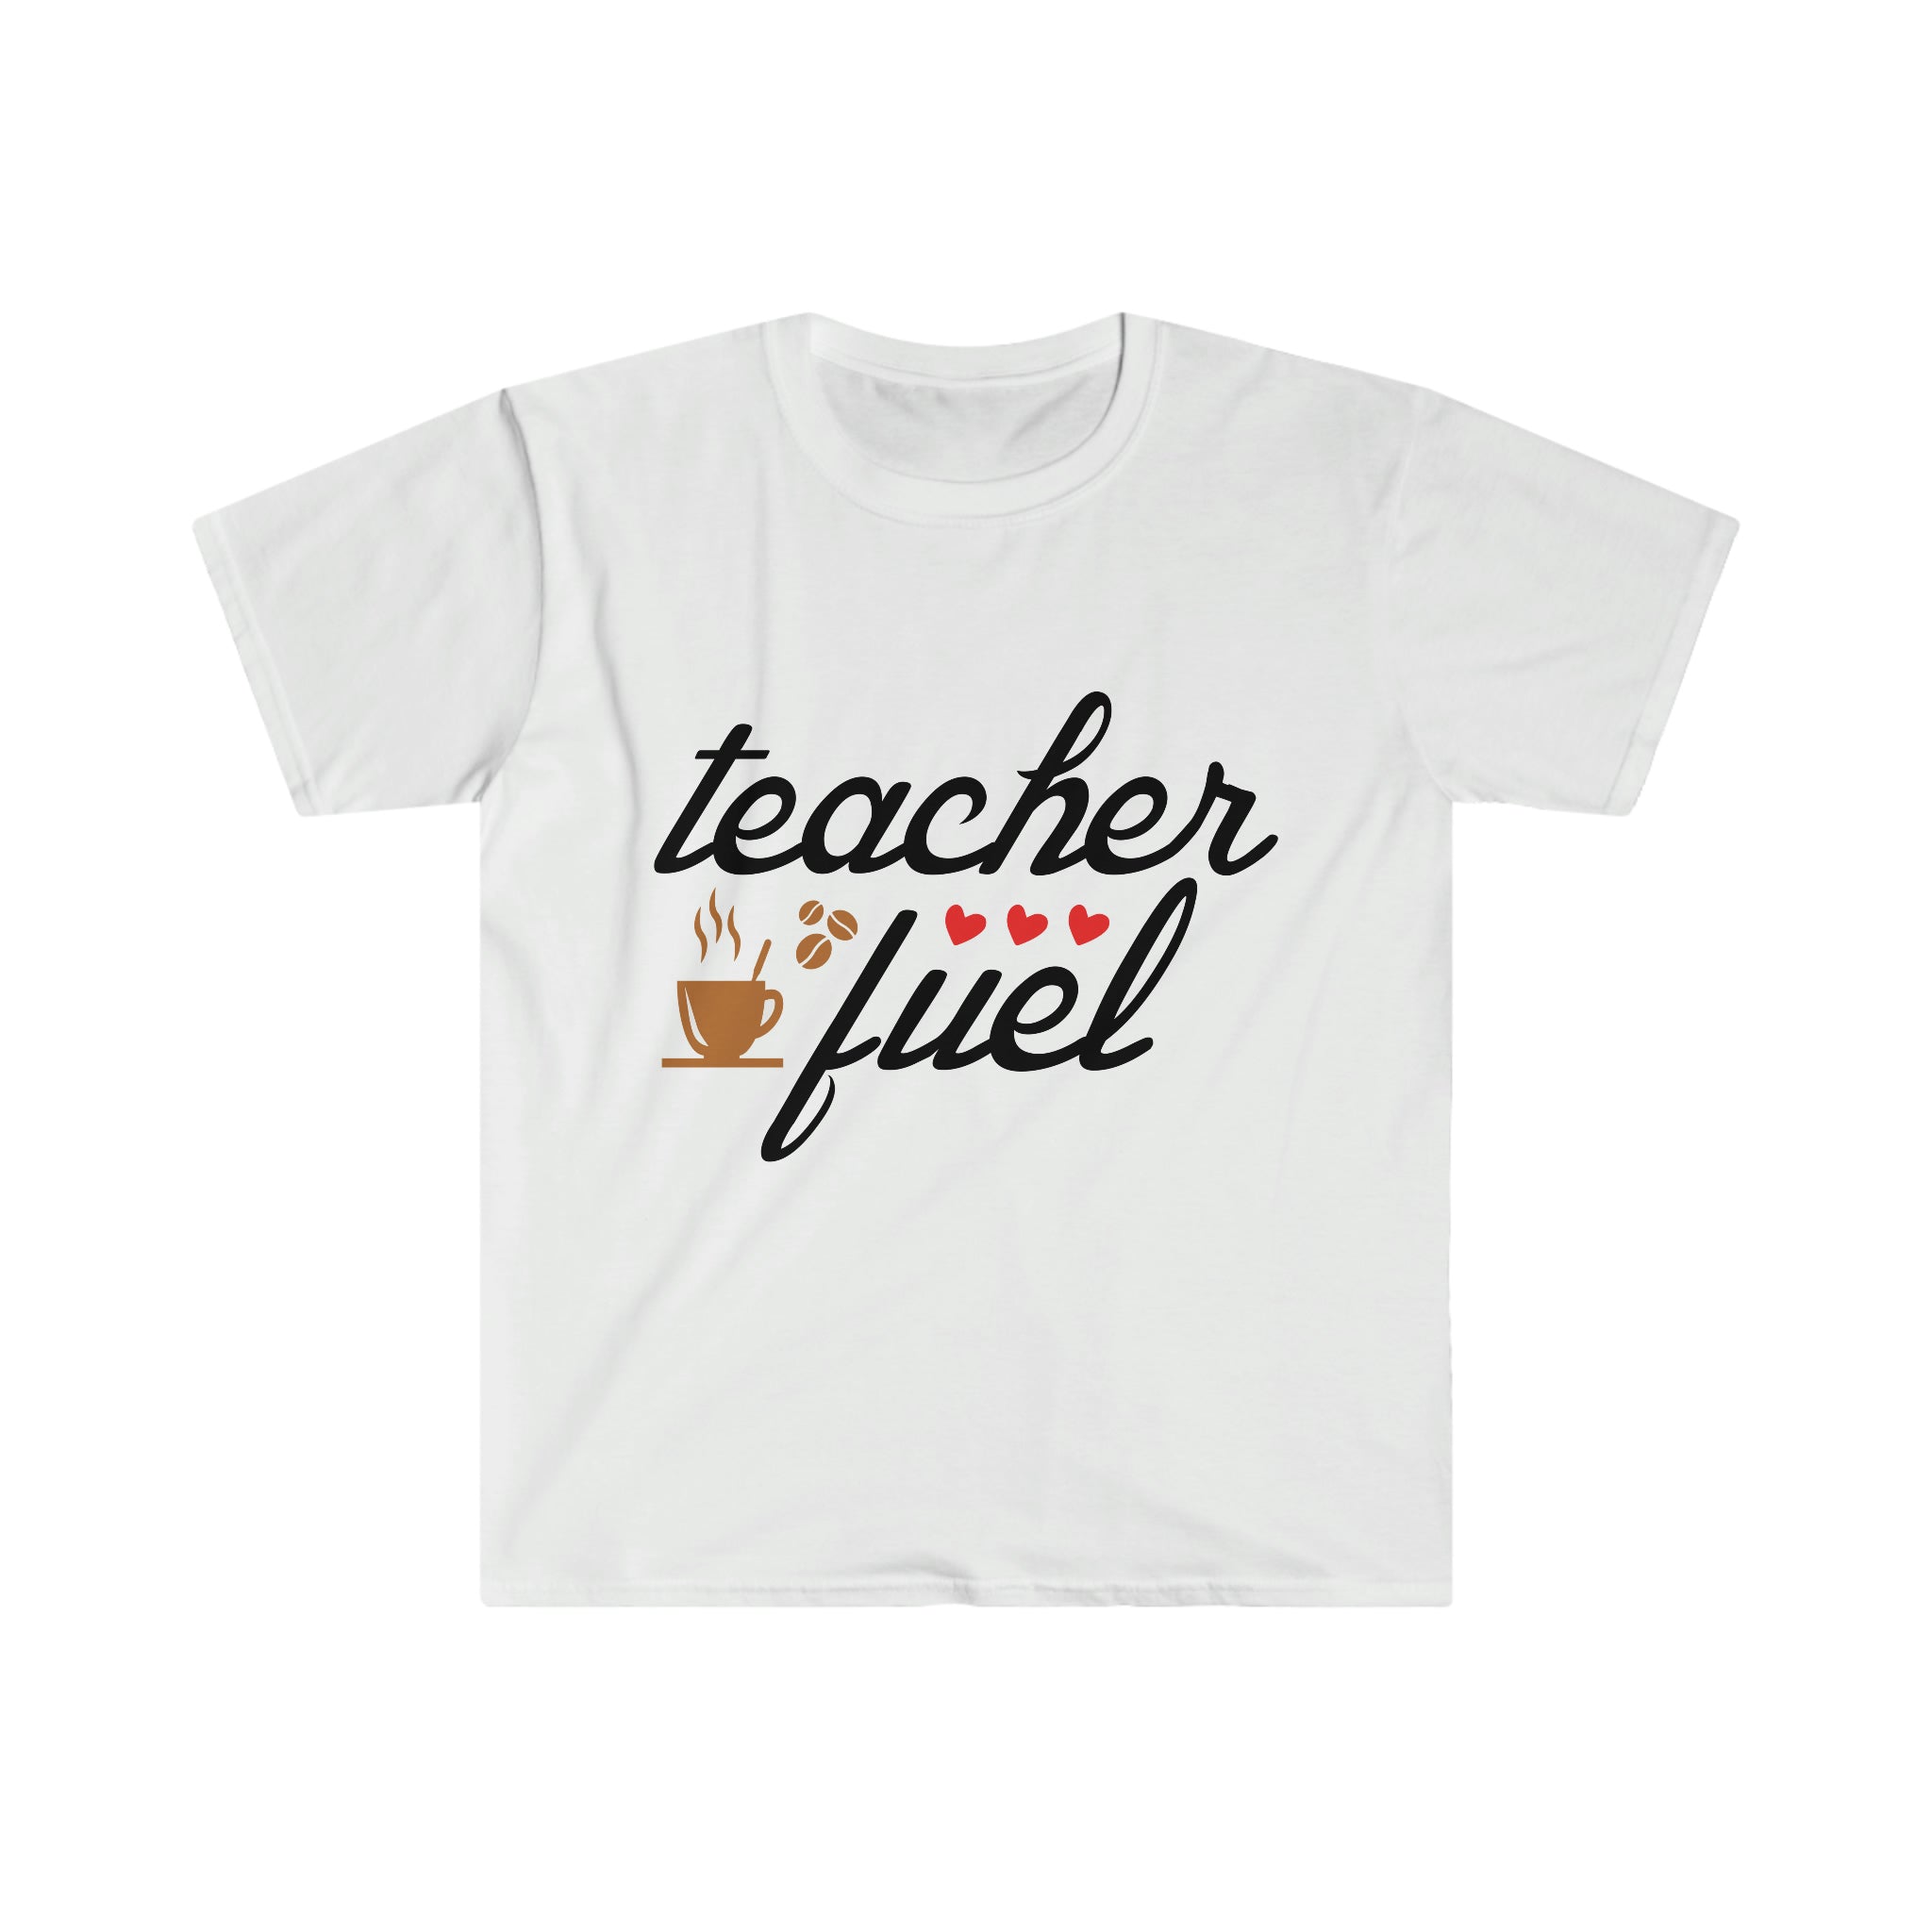 A fashionable white Teacher's Fuel T-Shirt, perfect for making a classroom fashion statement.